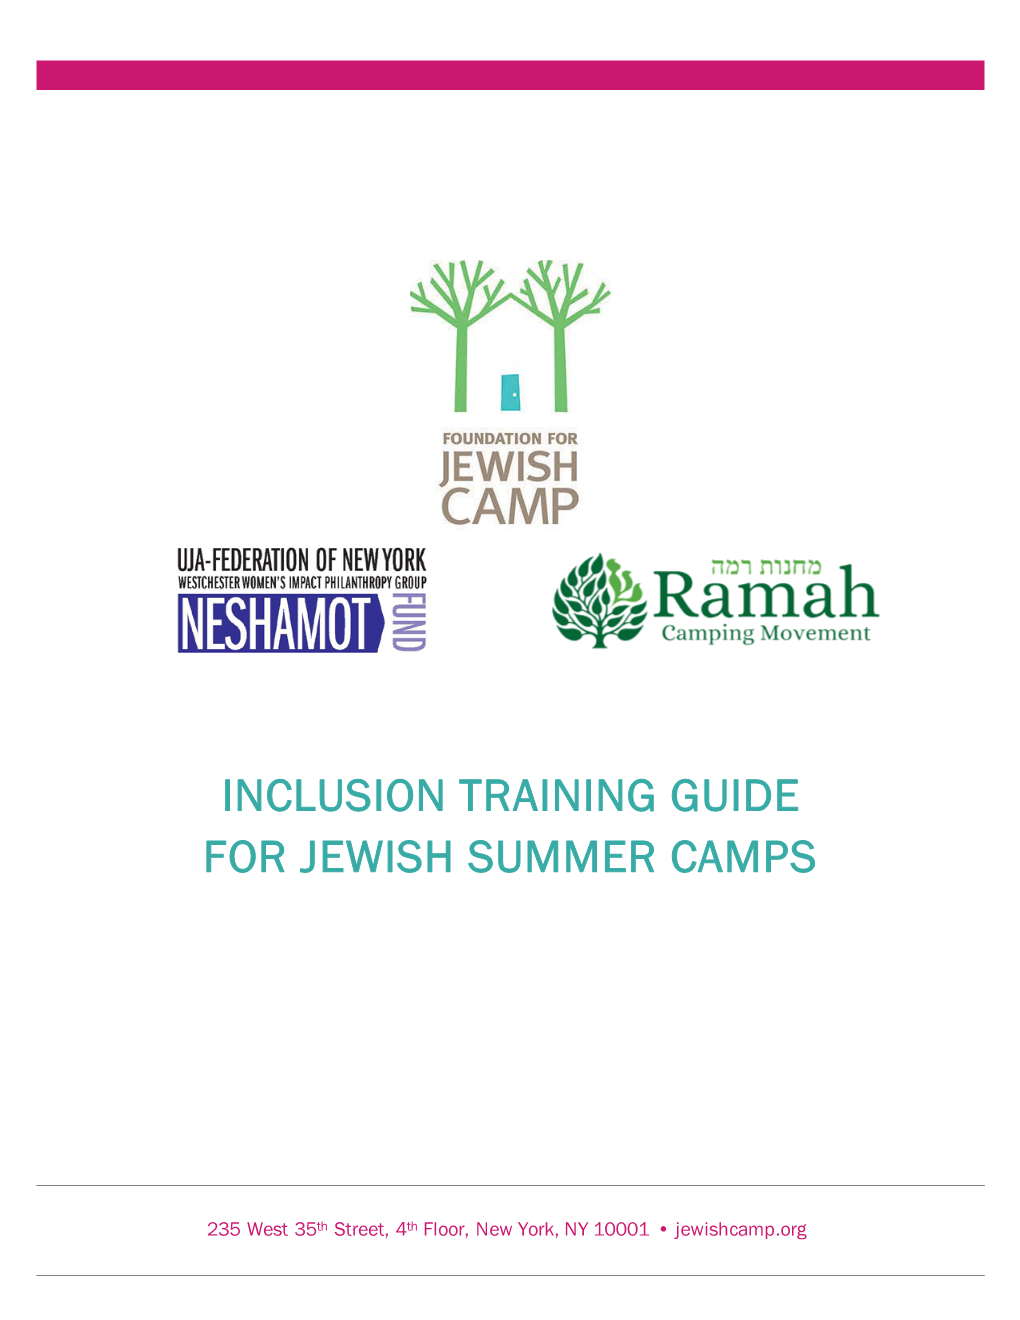 Inclusion Training Guide for Jewish Summer Camps